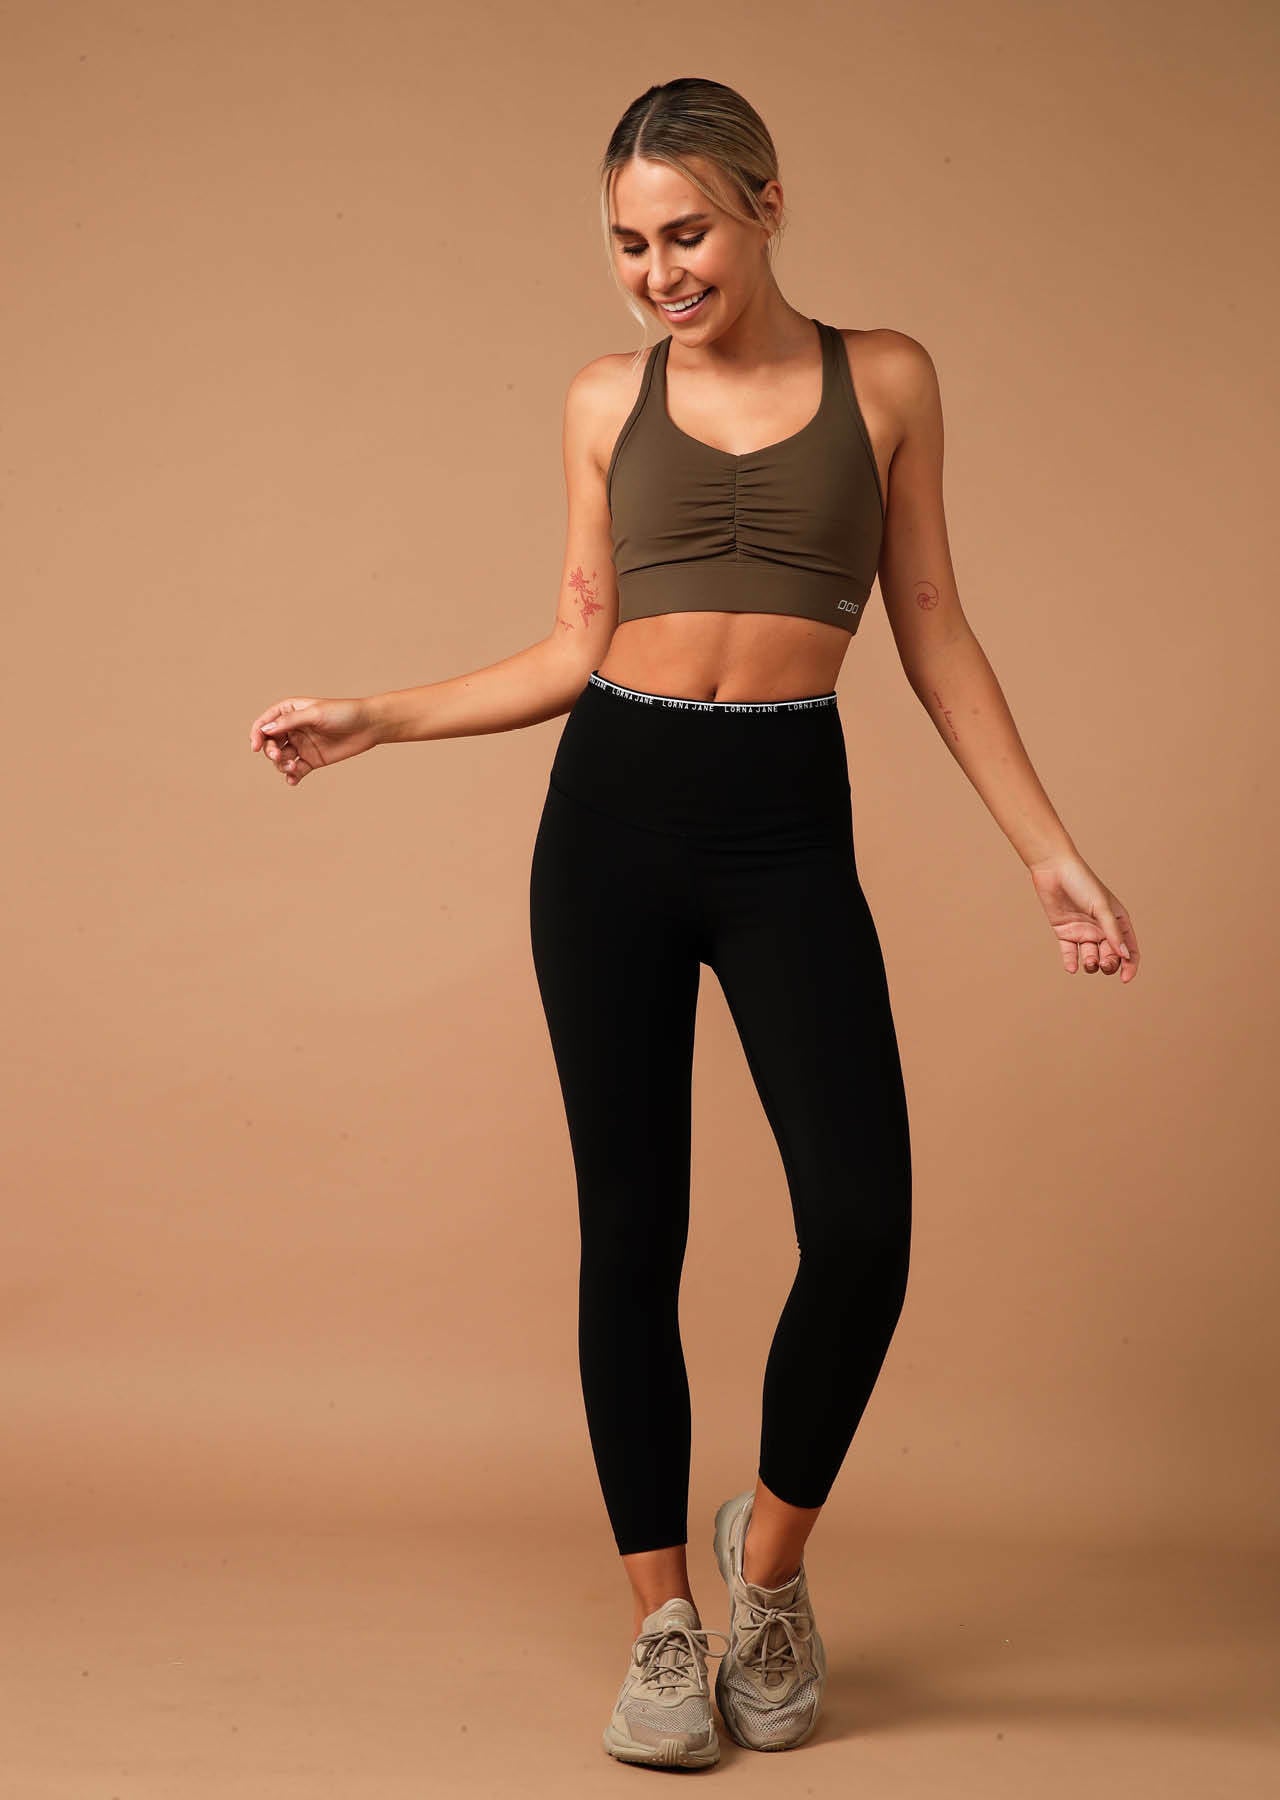 Lorna Jane's Top-Selling Activewear Is on Sale Right Now